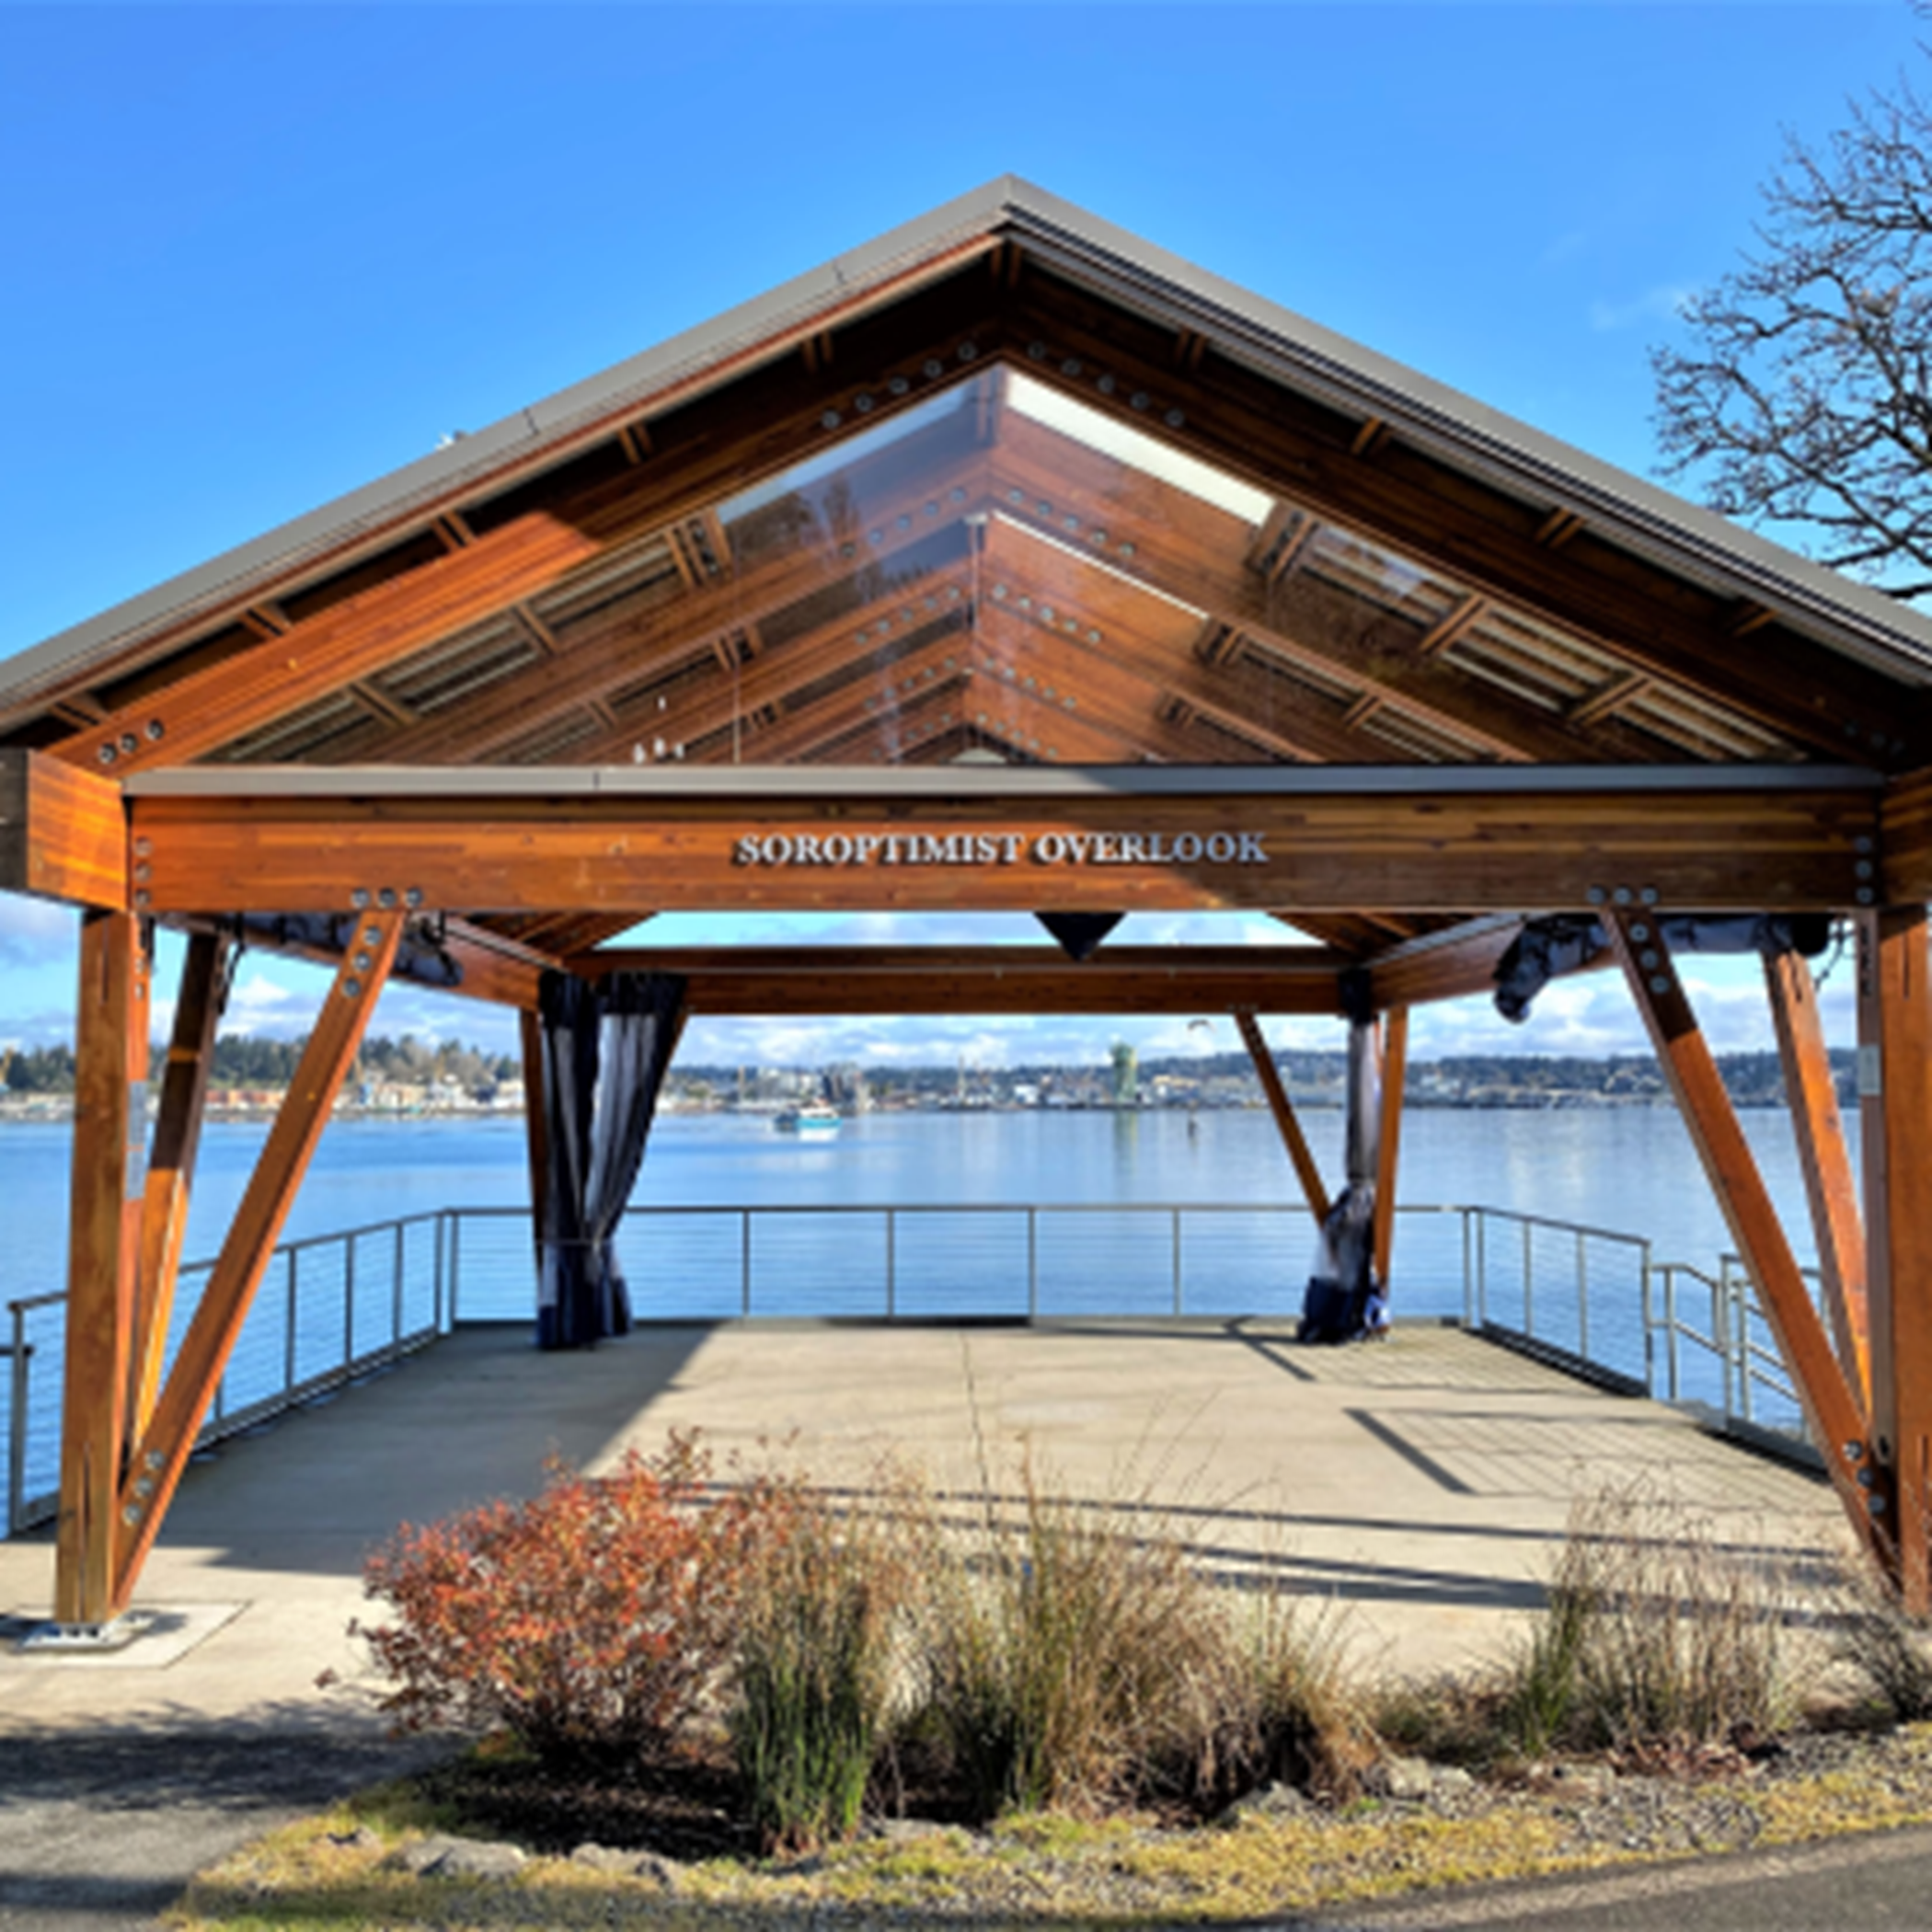 A covered overlook with a gable roof that views the waterfront